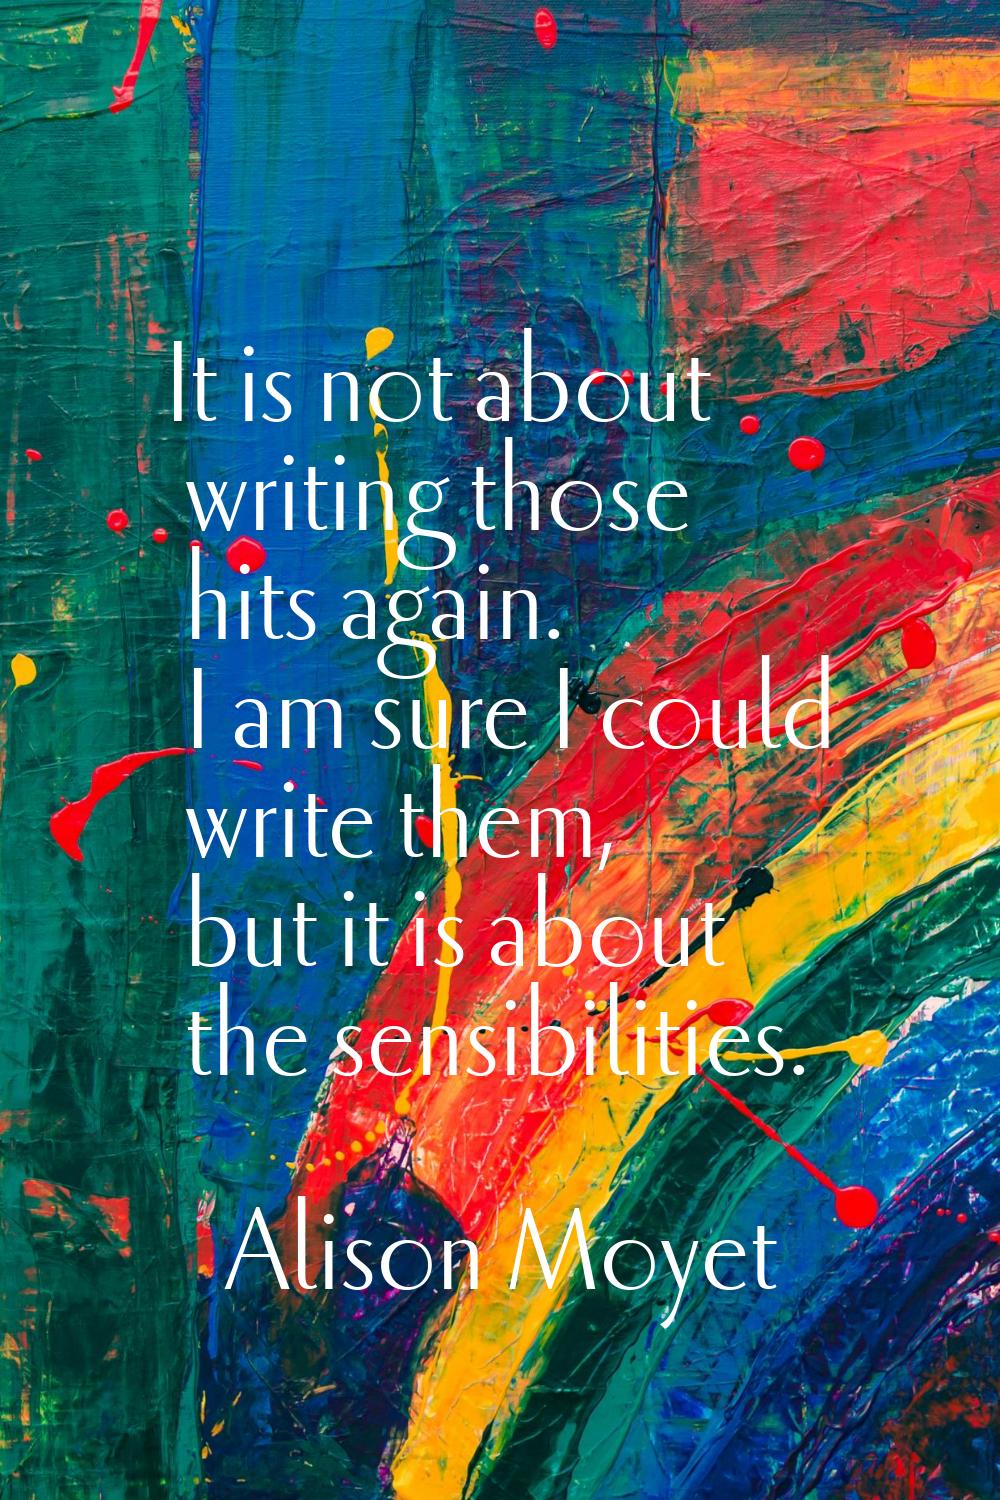 It is not about writing those hits again. I am sure I could write them, but it is about the sensibi